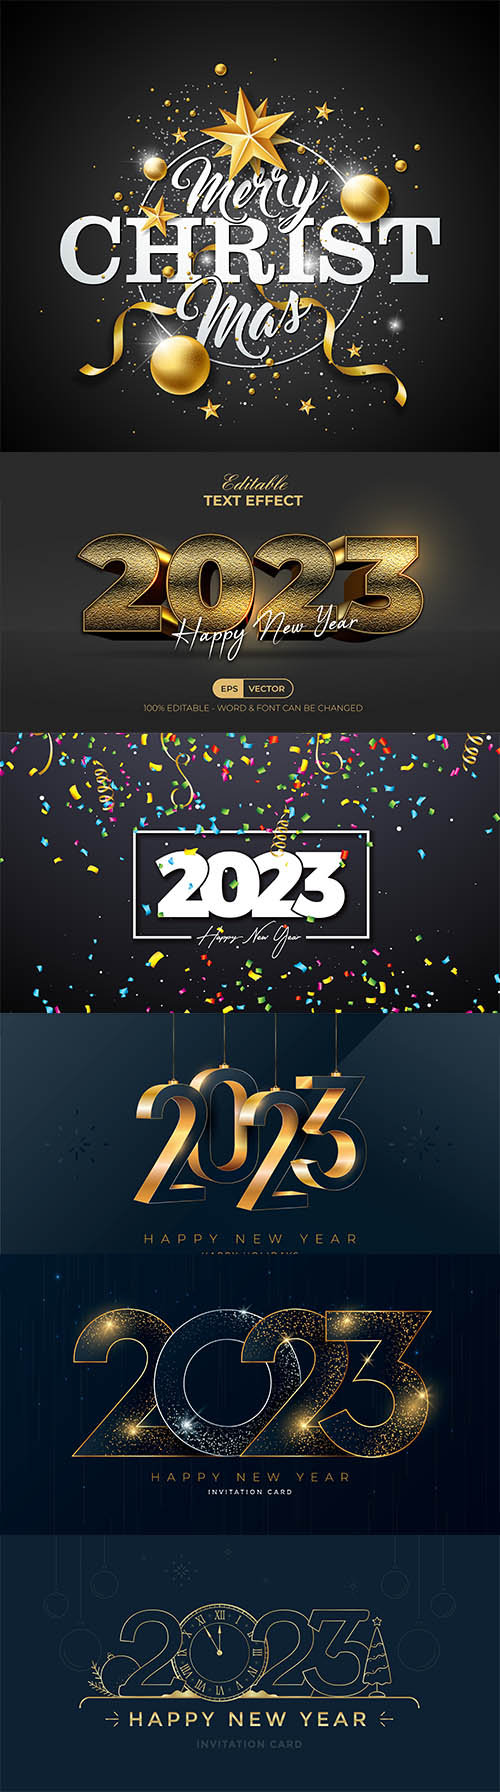 2023 illustration with gold lettering and party balloon on dark background